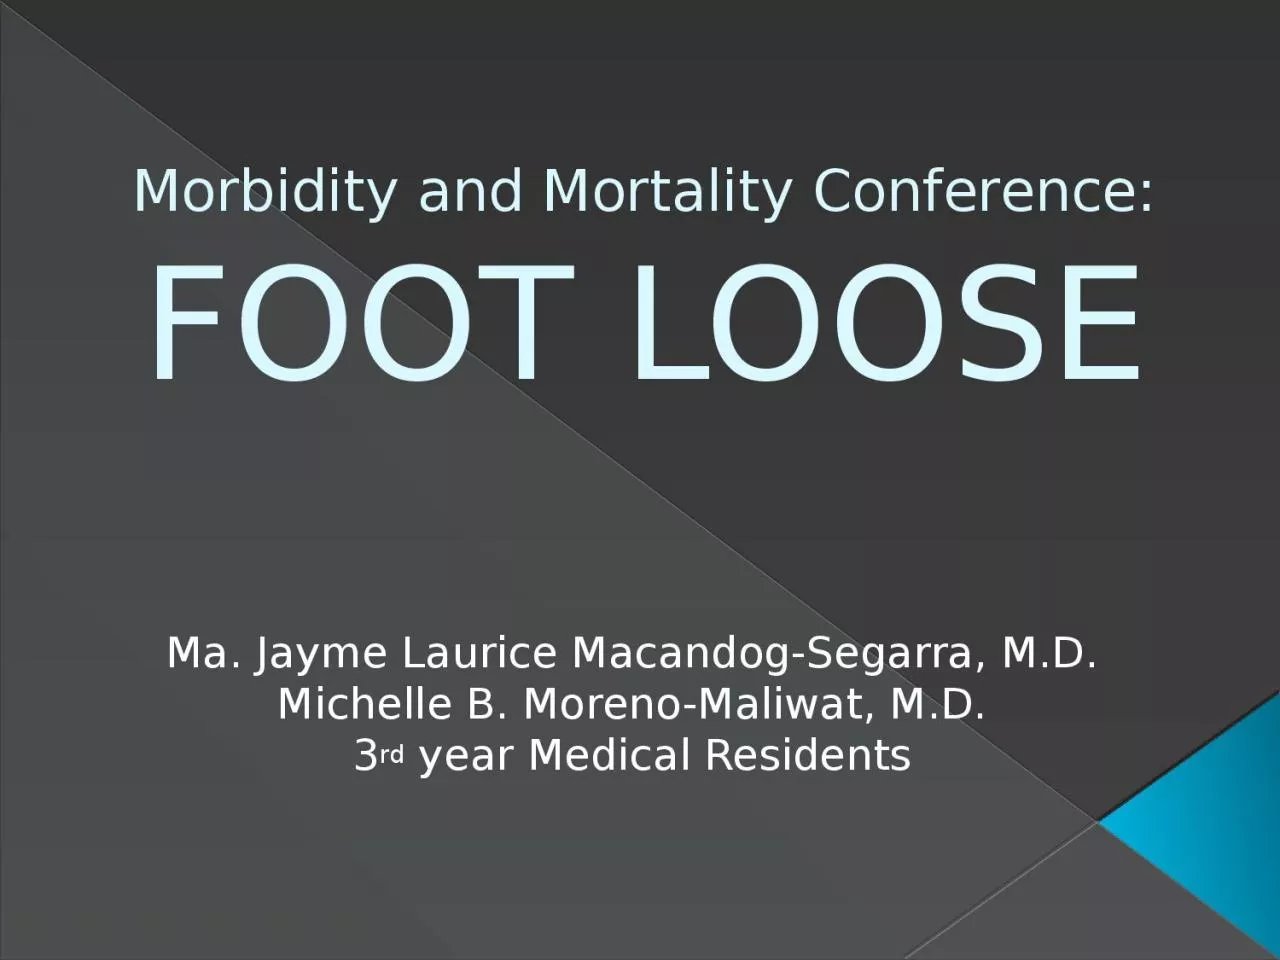 Morbidity and Mortality Conference: